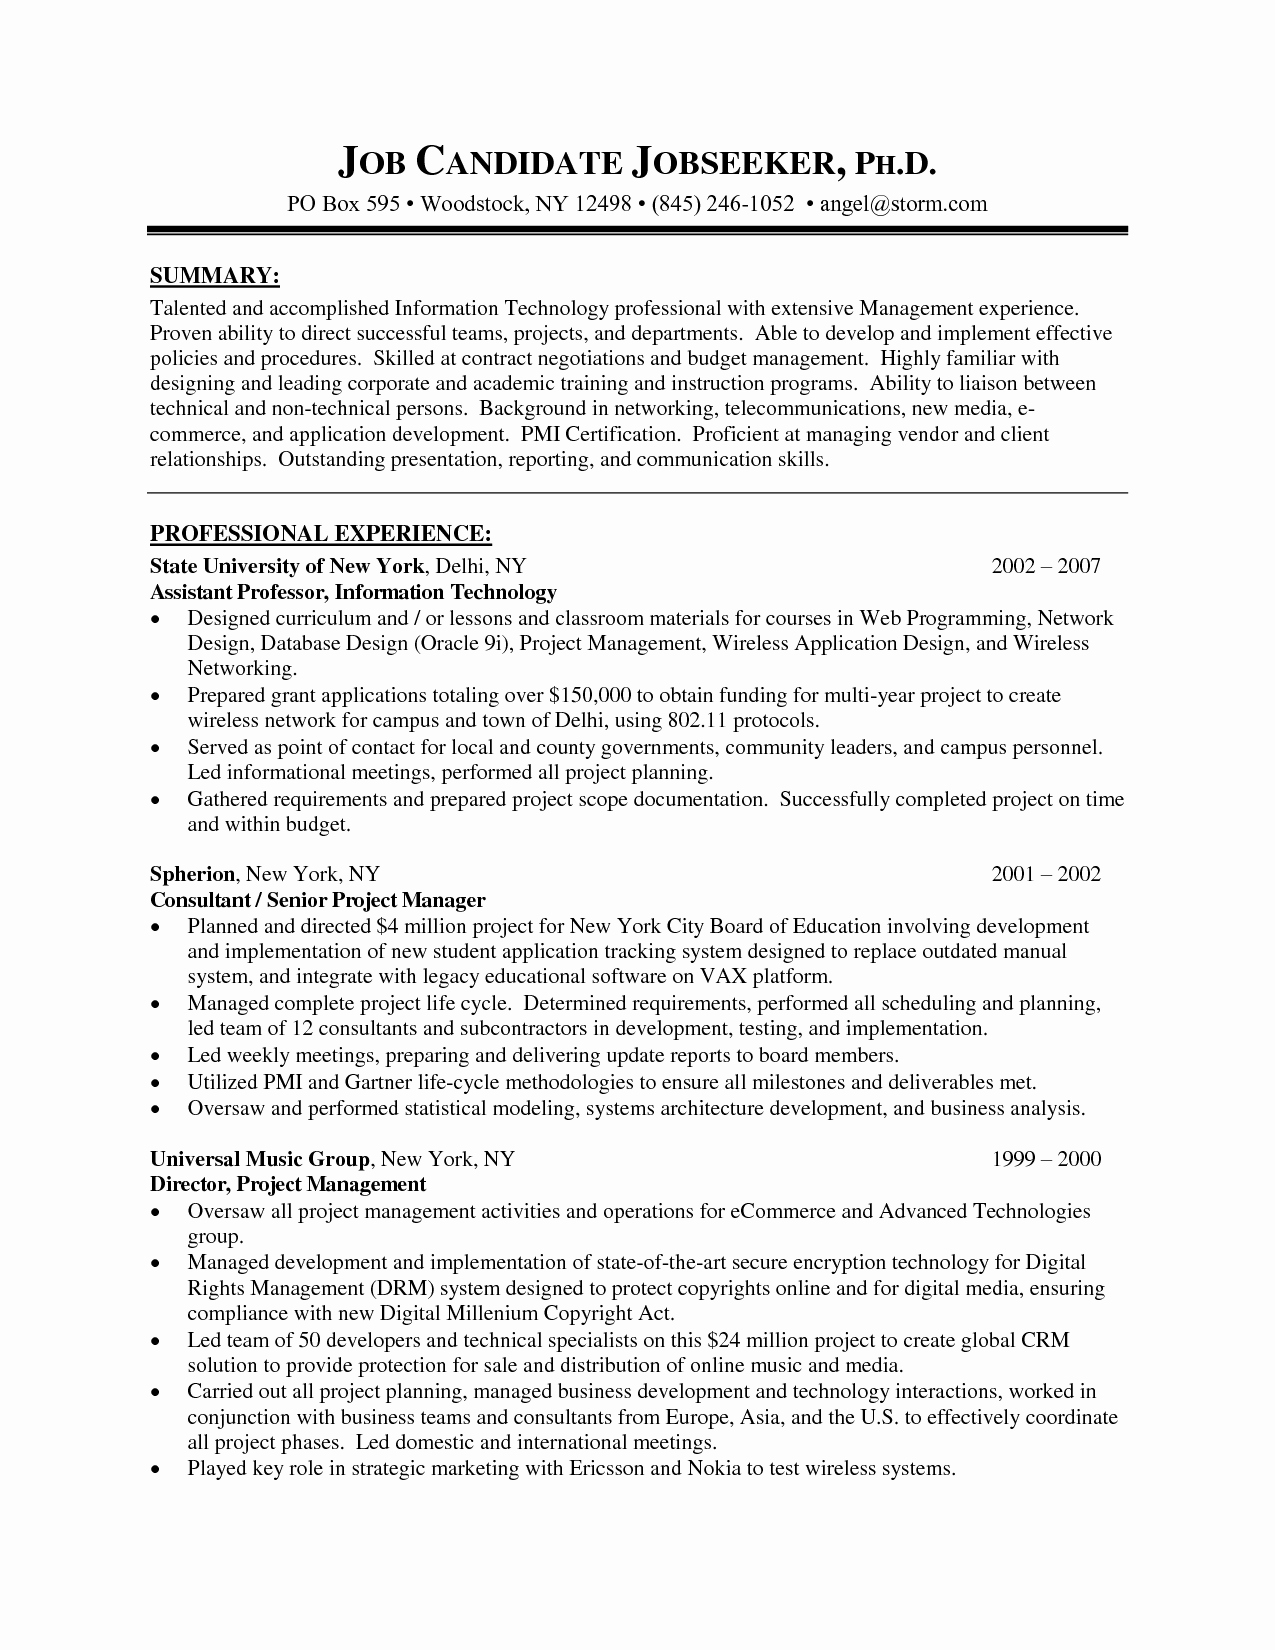 Senior Project Manager Resume Sample